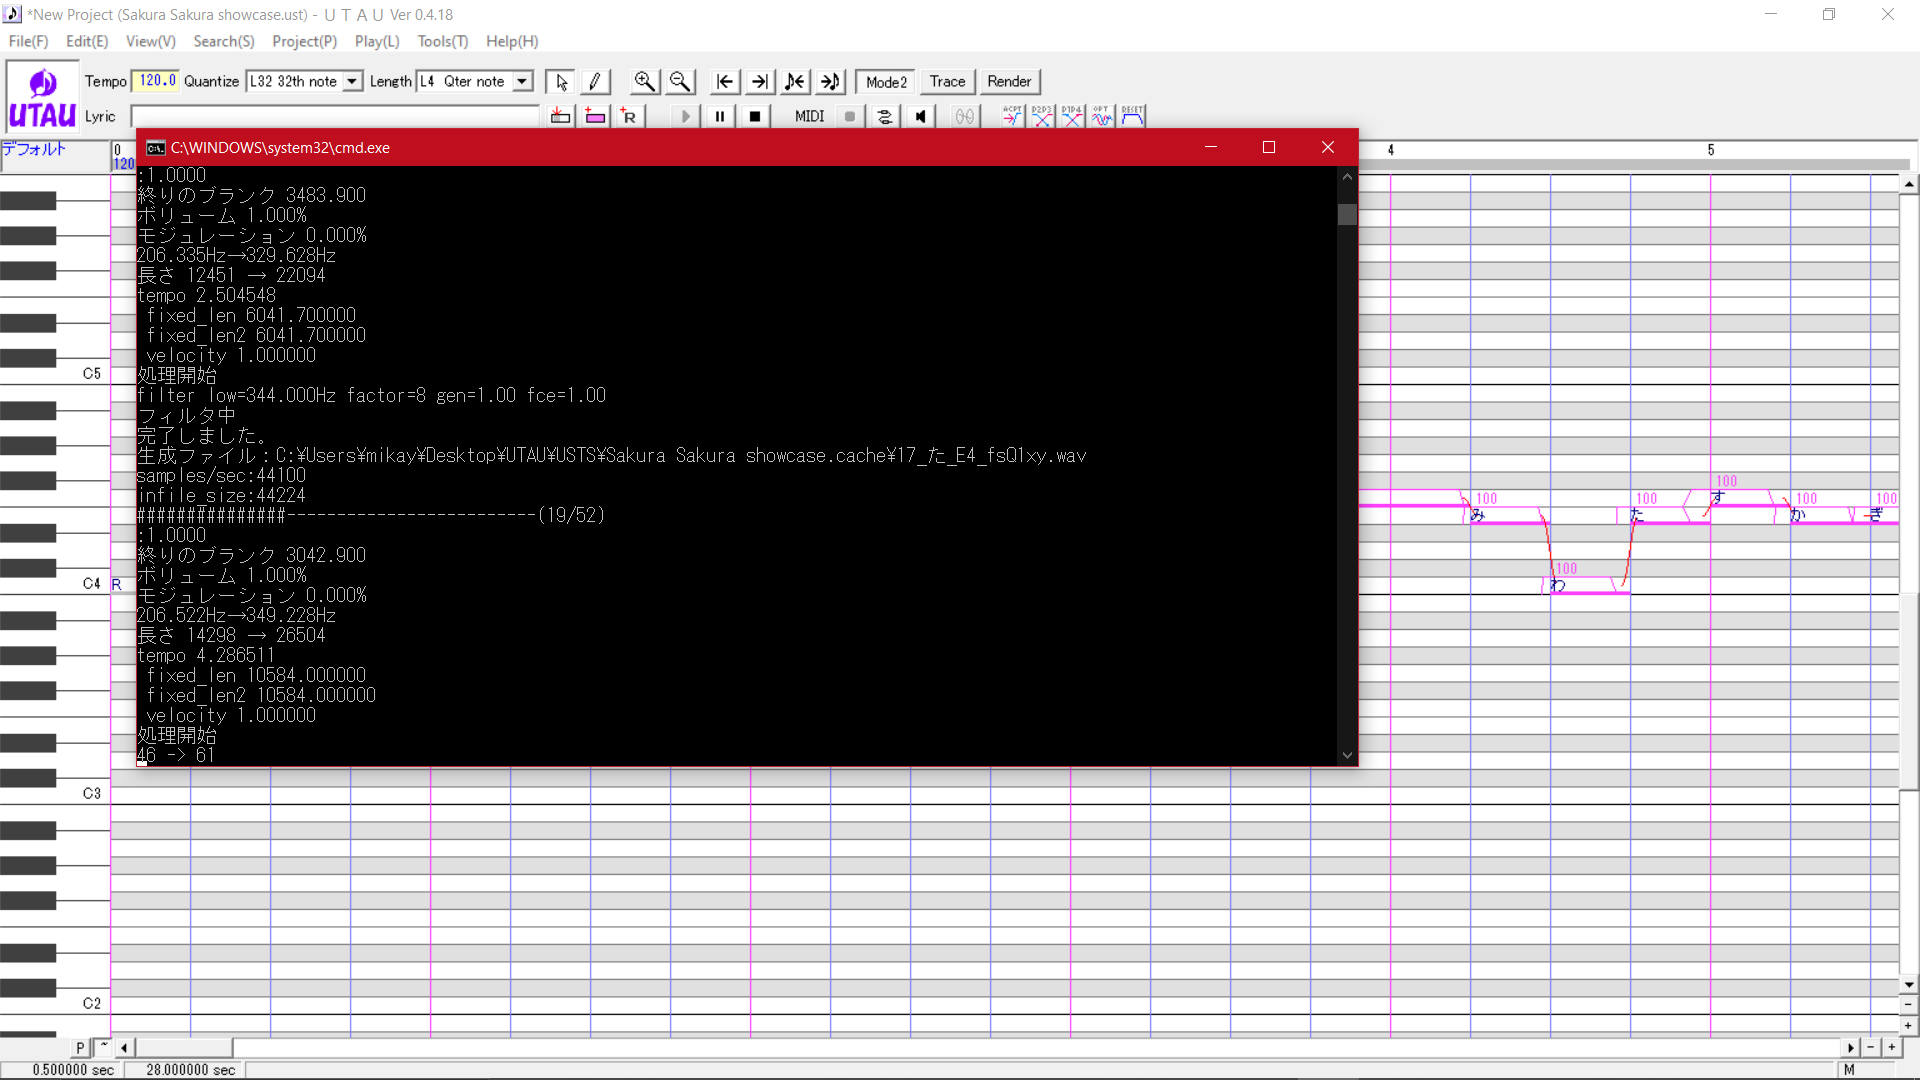 UTAU program window with a cmd.exe window running a process in front of it